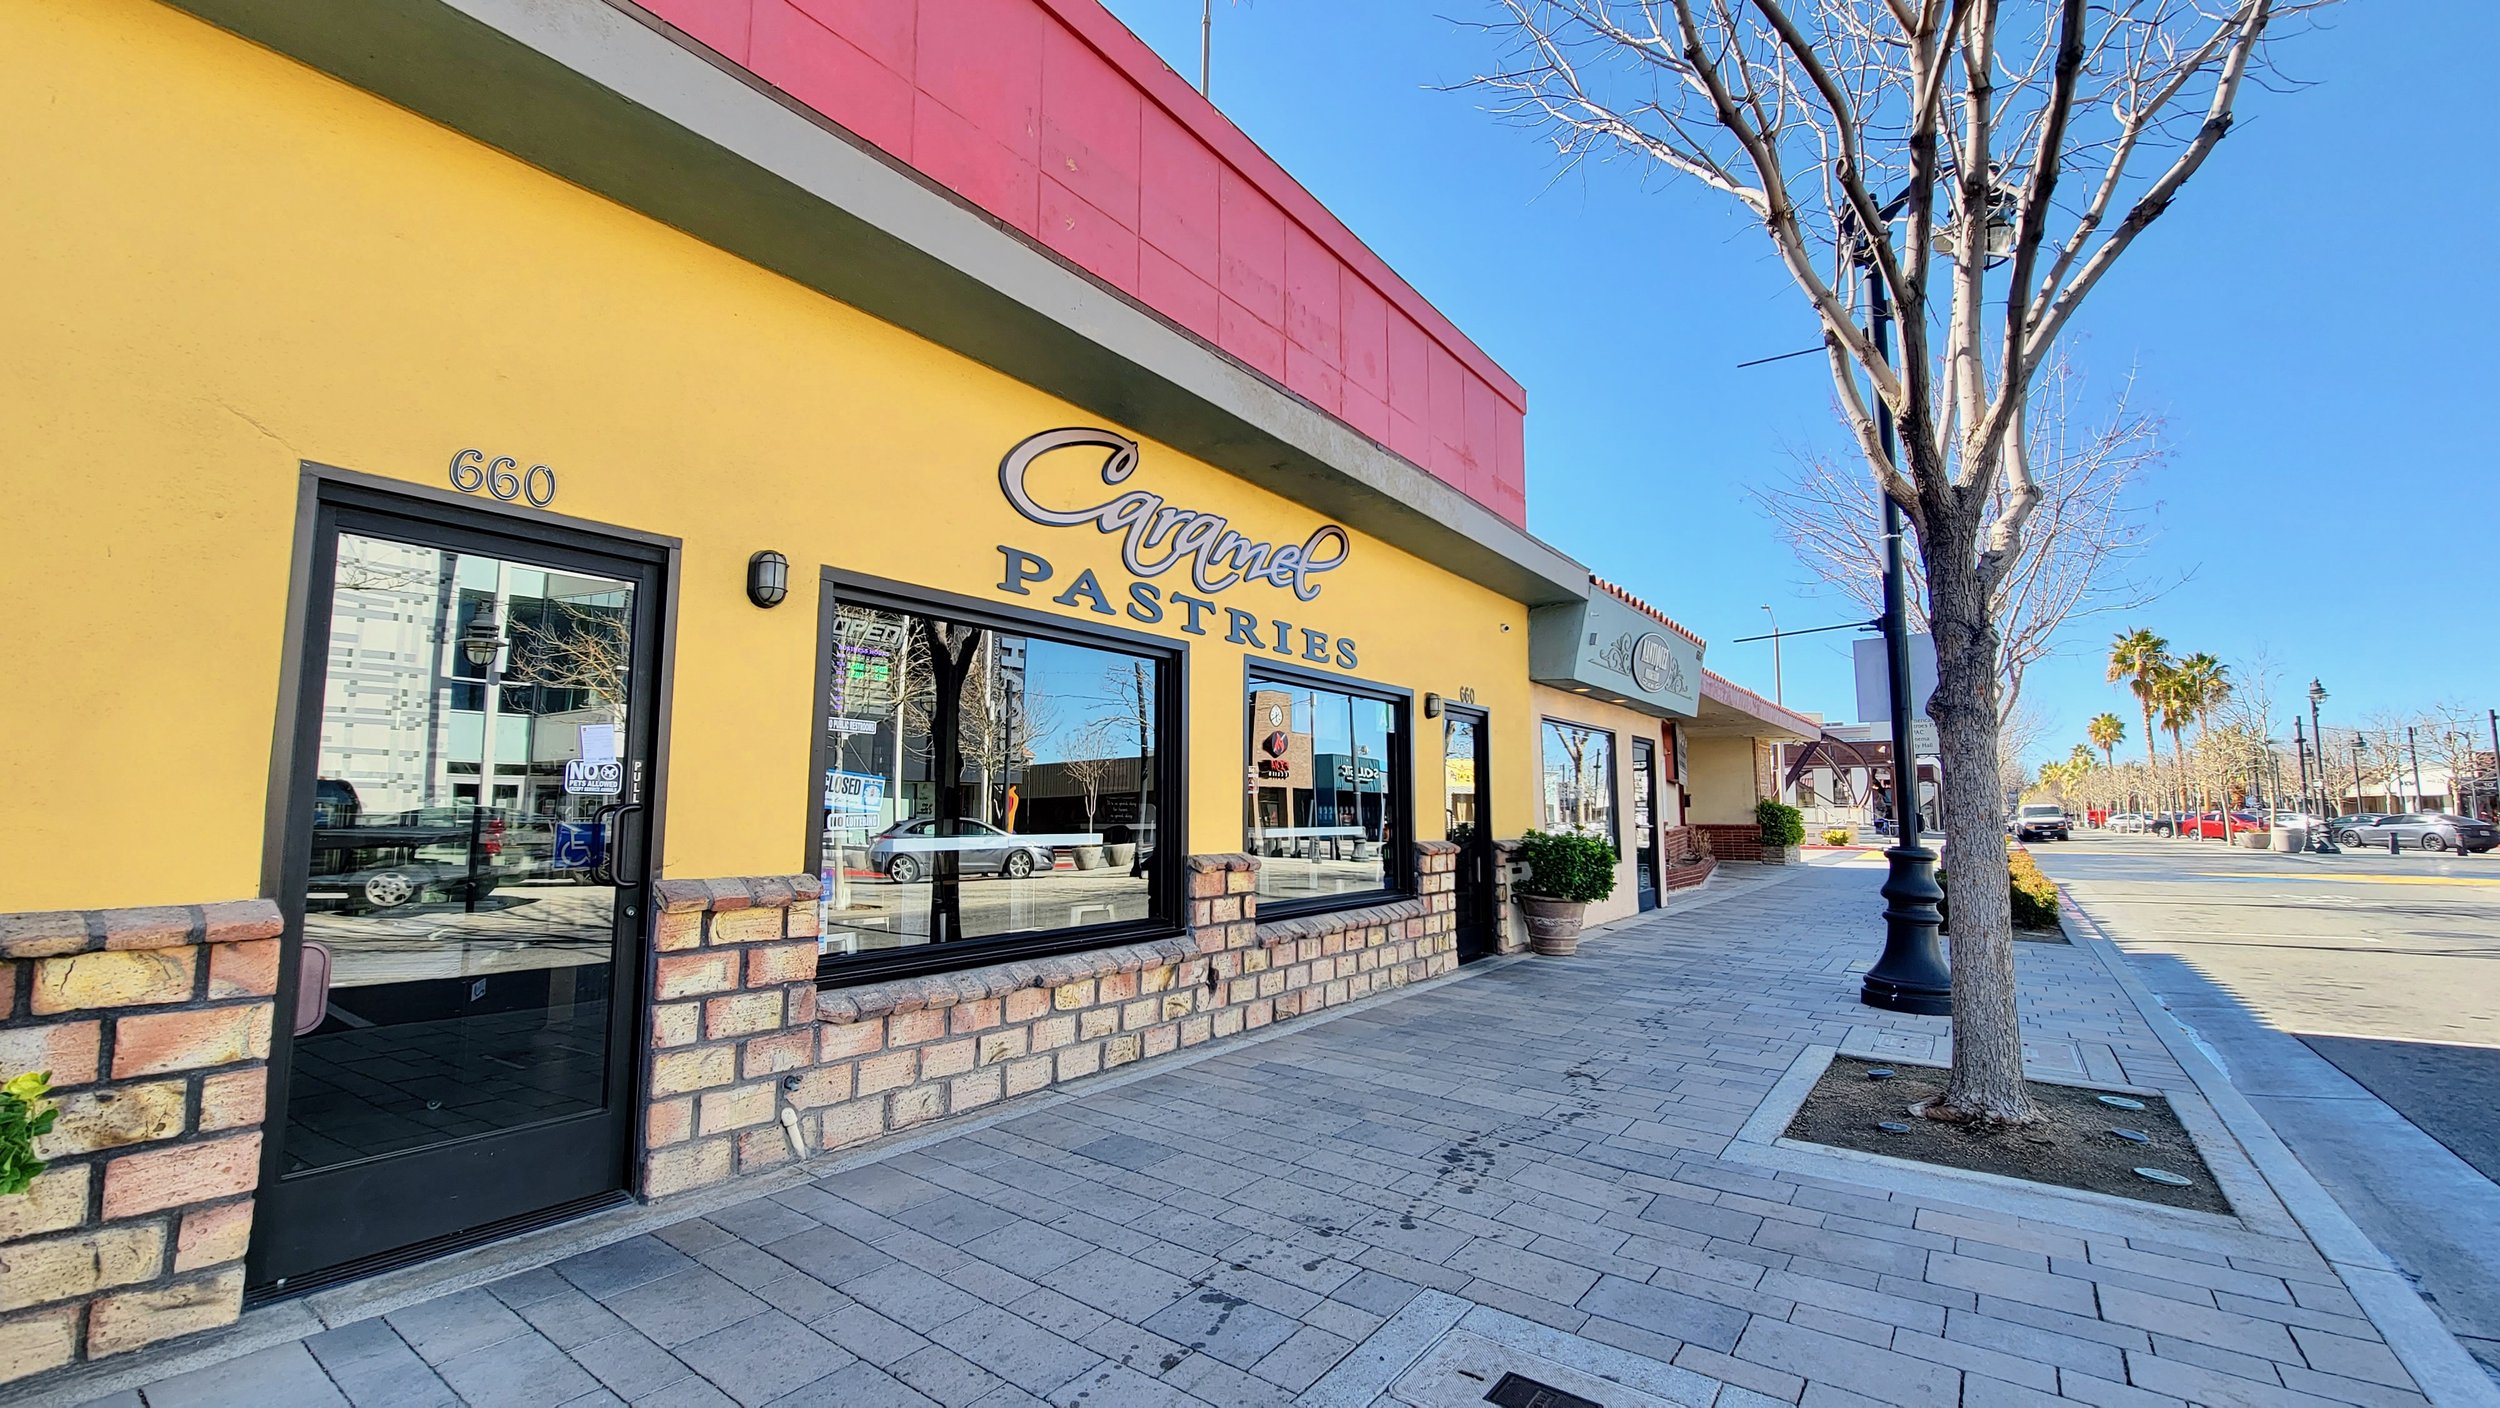 Sidewalk view of Caramel Pastries shop with yellow walls and a bright sky, leafless tree nearby.